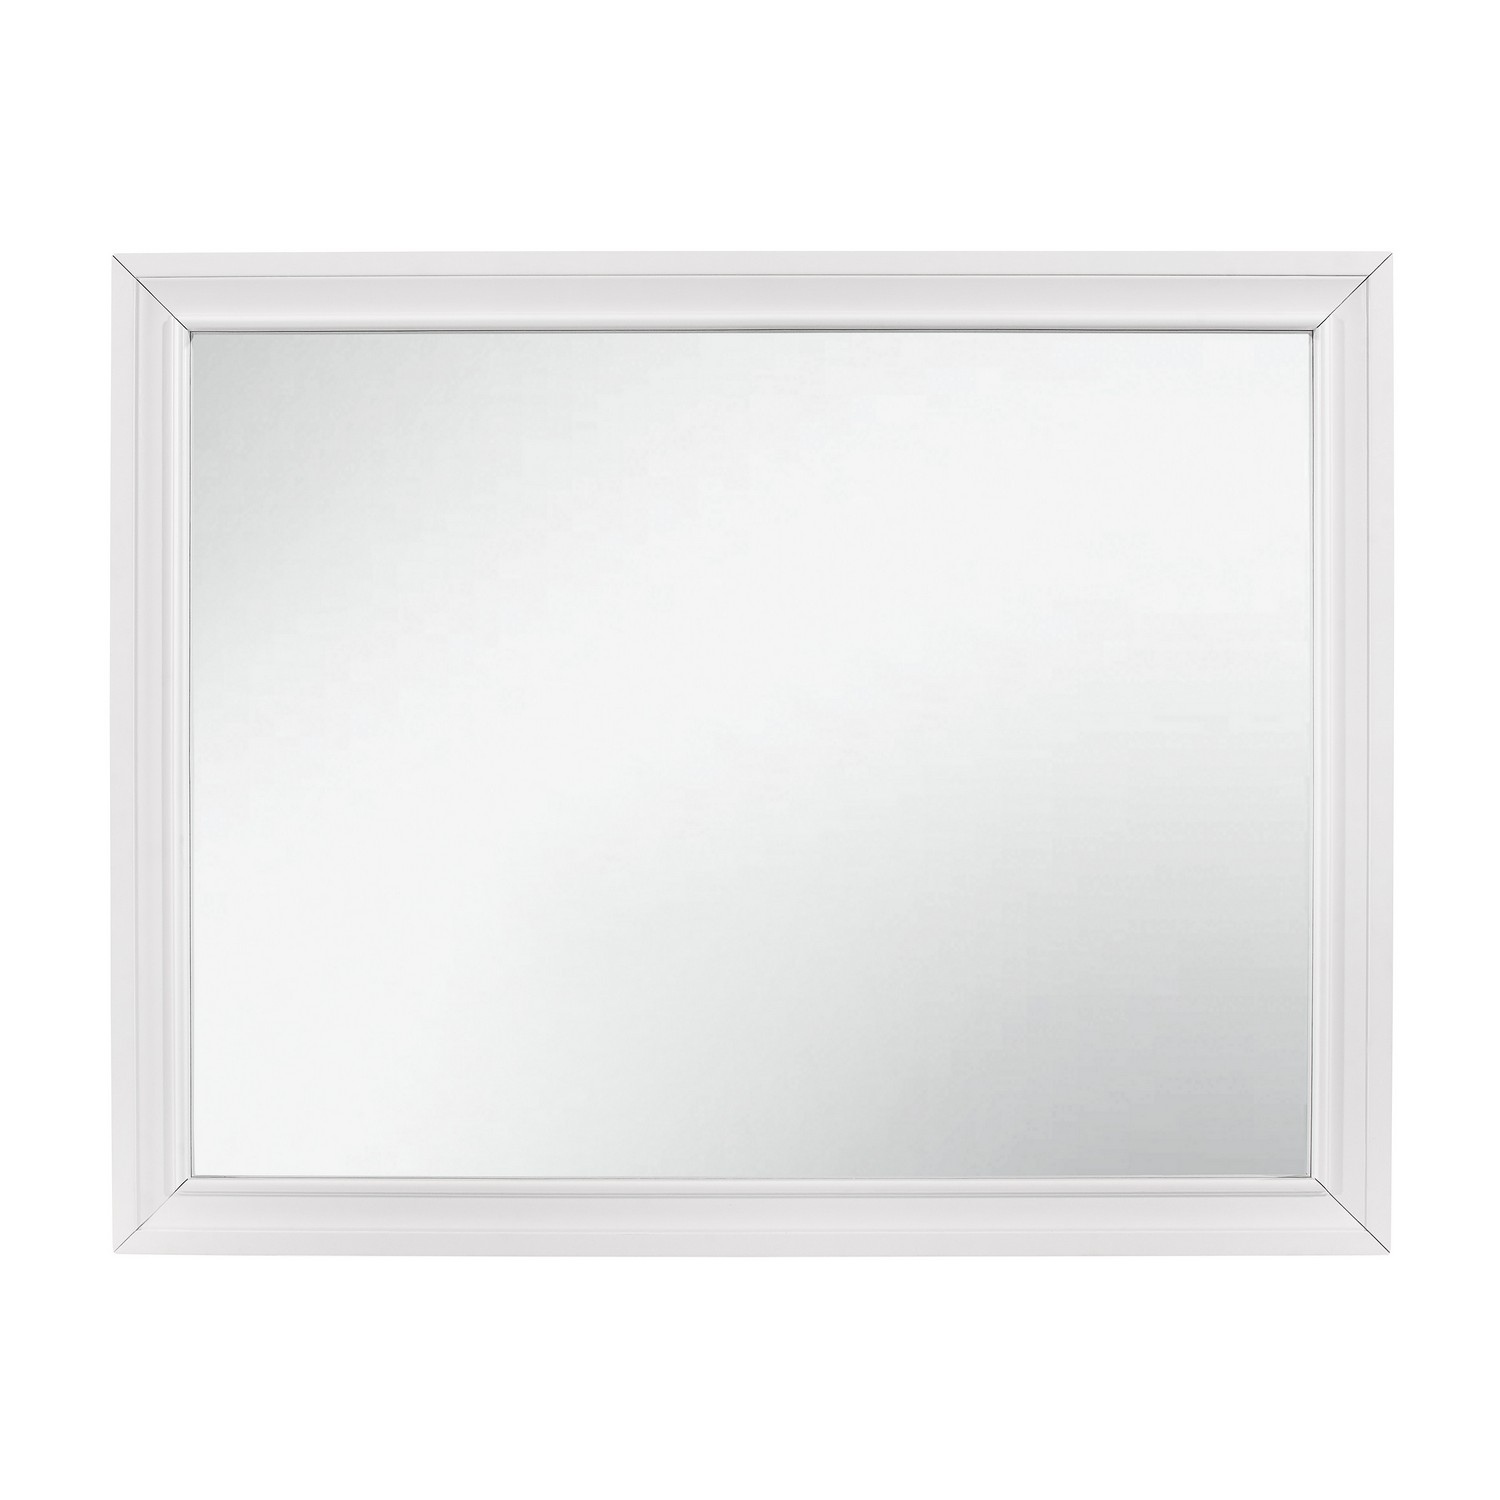 Homelegance Luster Mirror - Two-tone : White And Silver Glitter